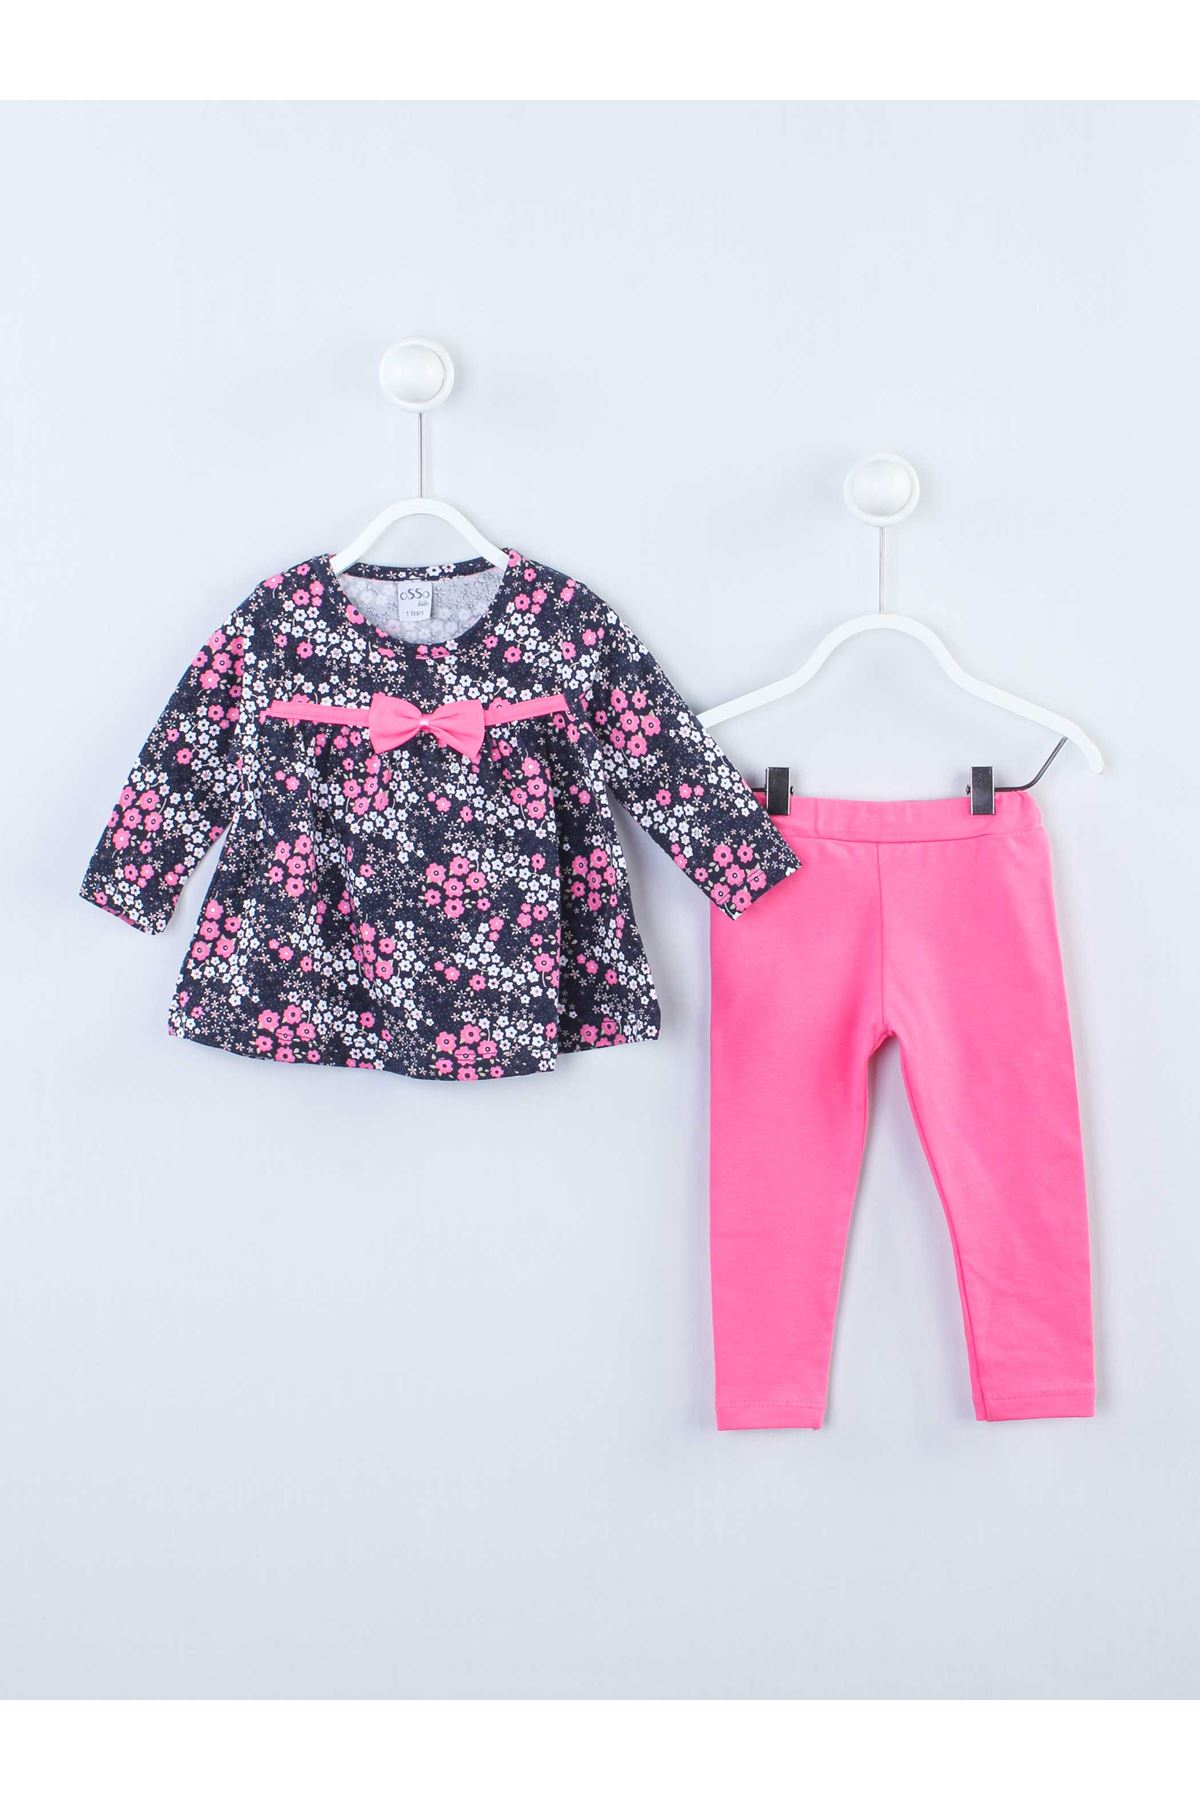 Fuchsia Kids Child girls tights suit top T-shirt tights cotton daily season wear outfit models